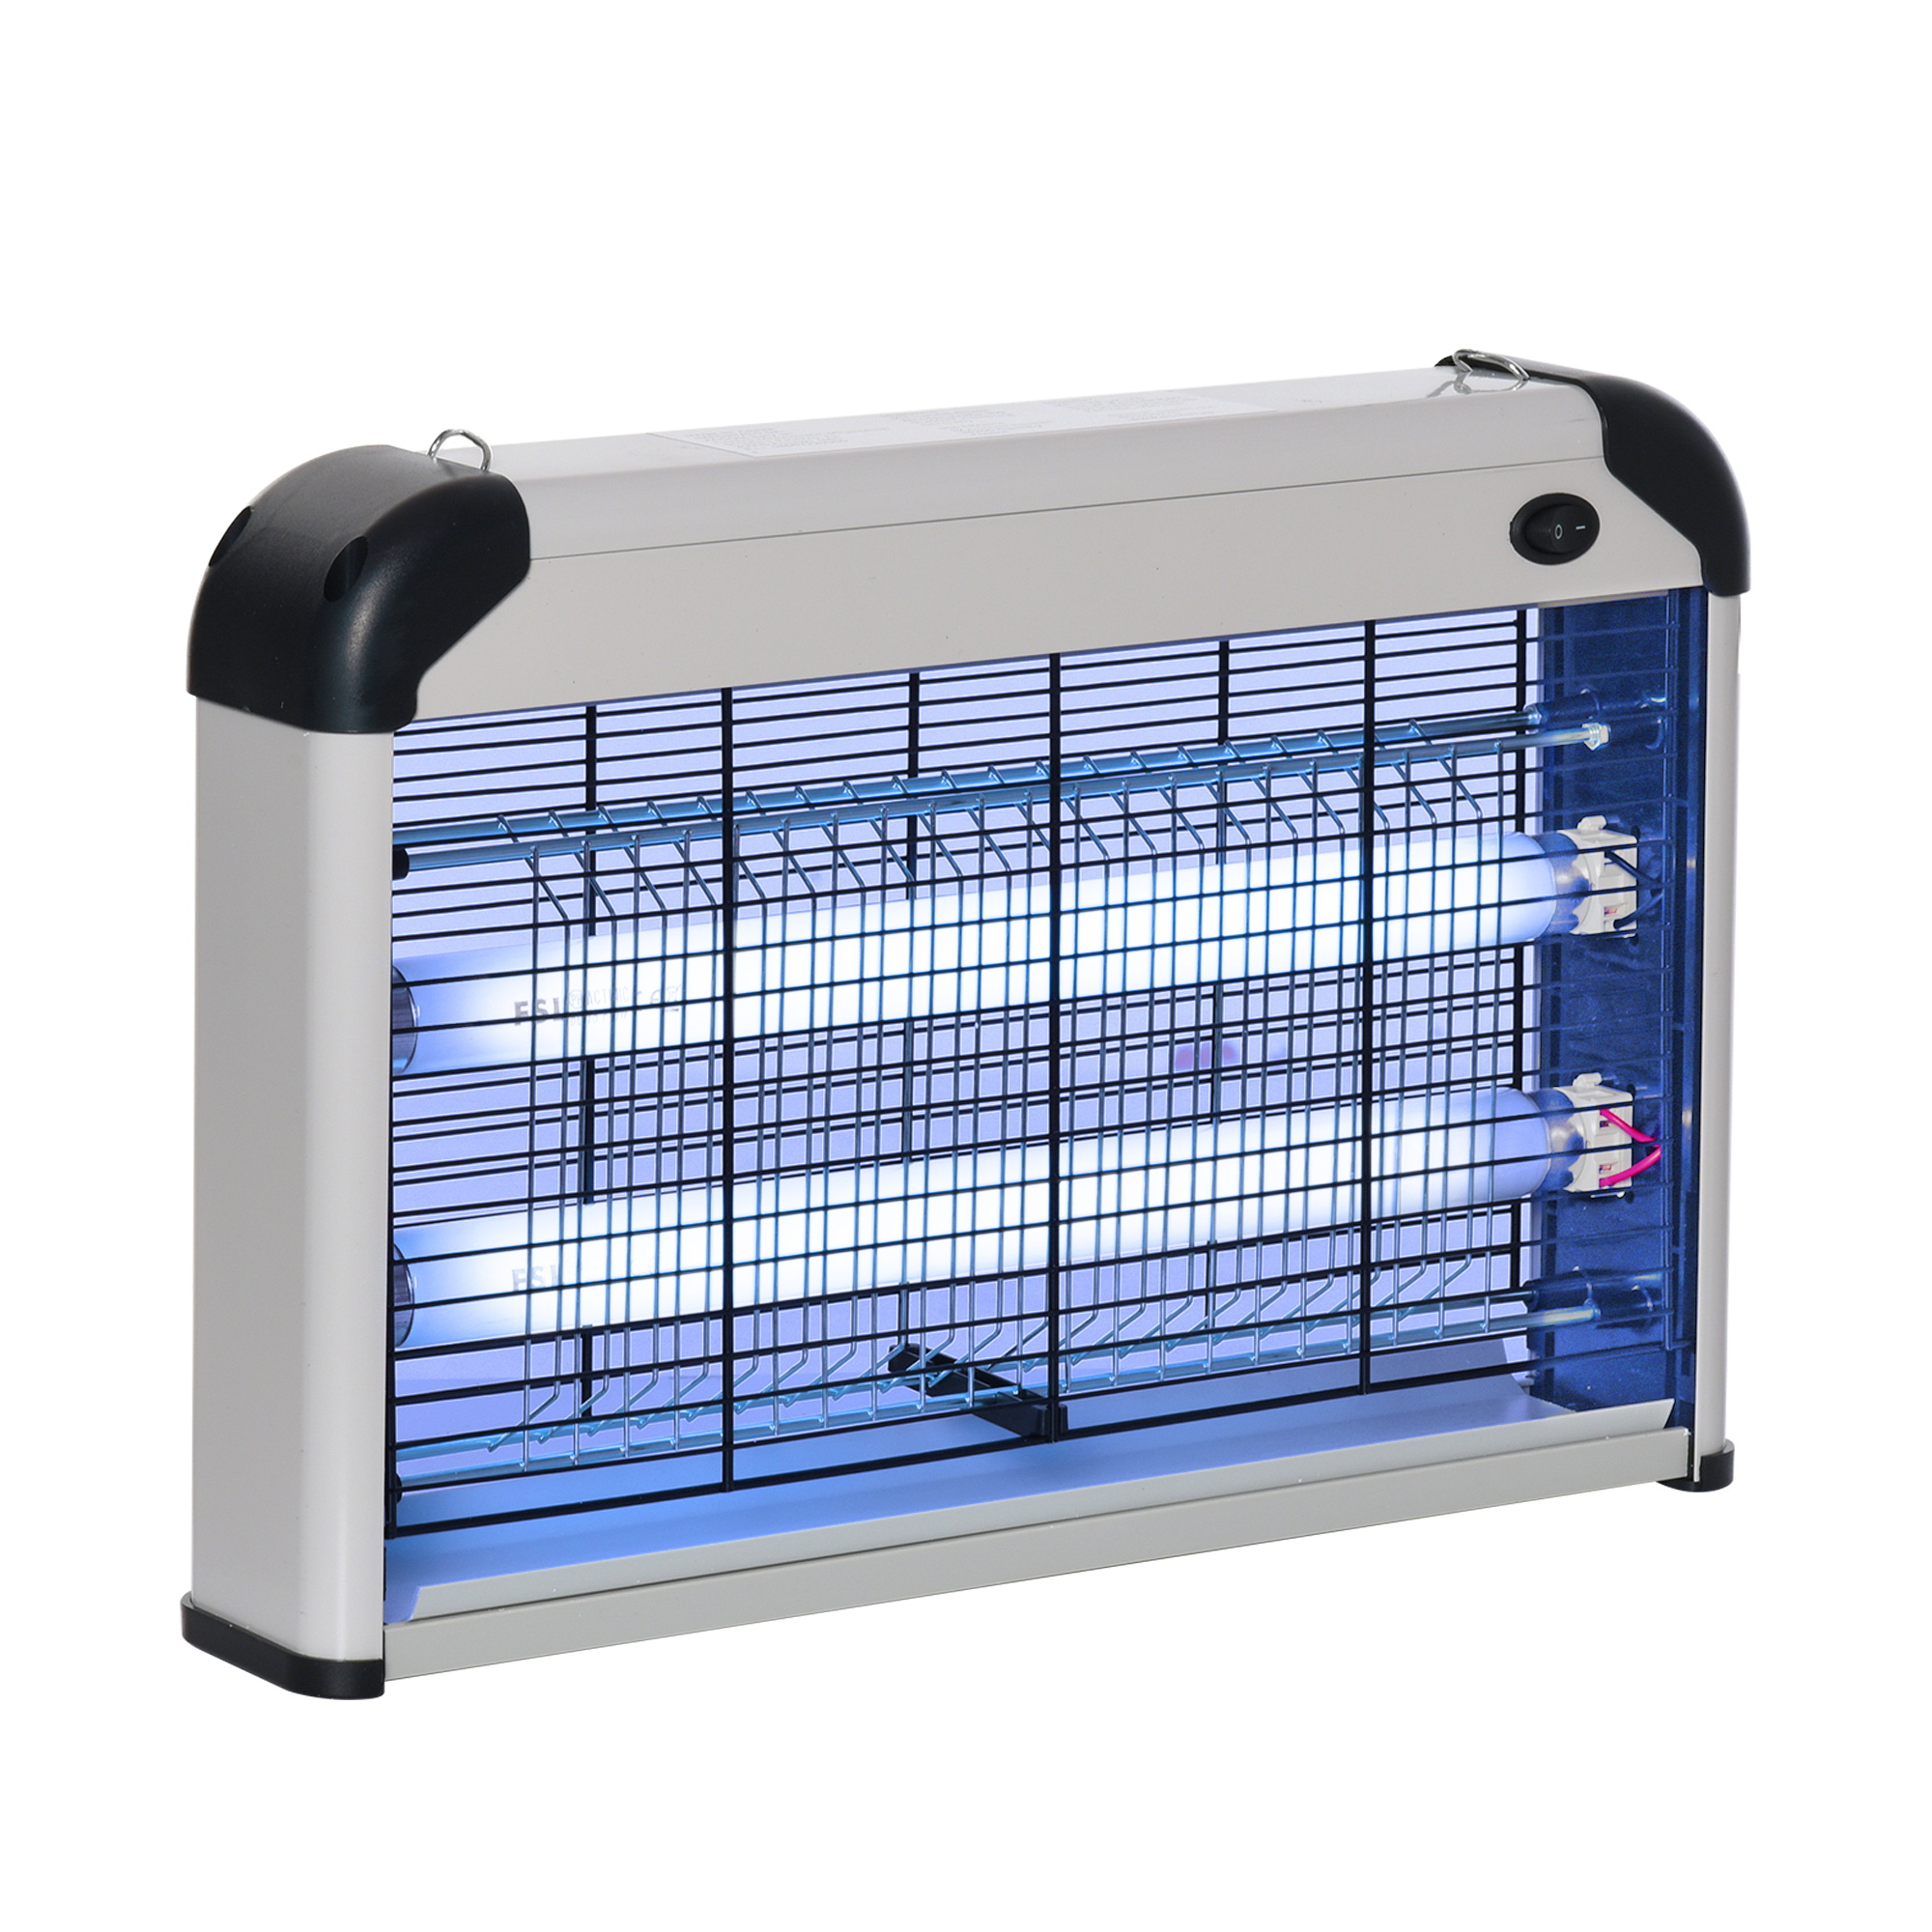 Outsunny Outsunny Outdoor and Indoor Insect Killer με Λάμπα LED Κουνουπιών για 60m²